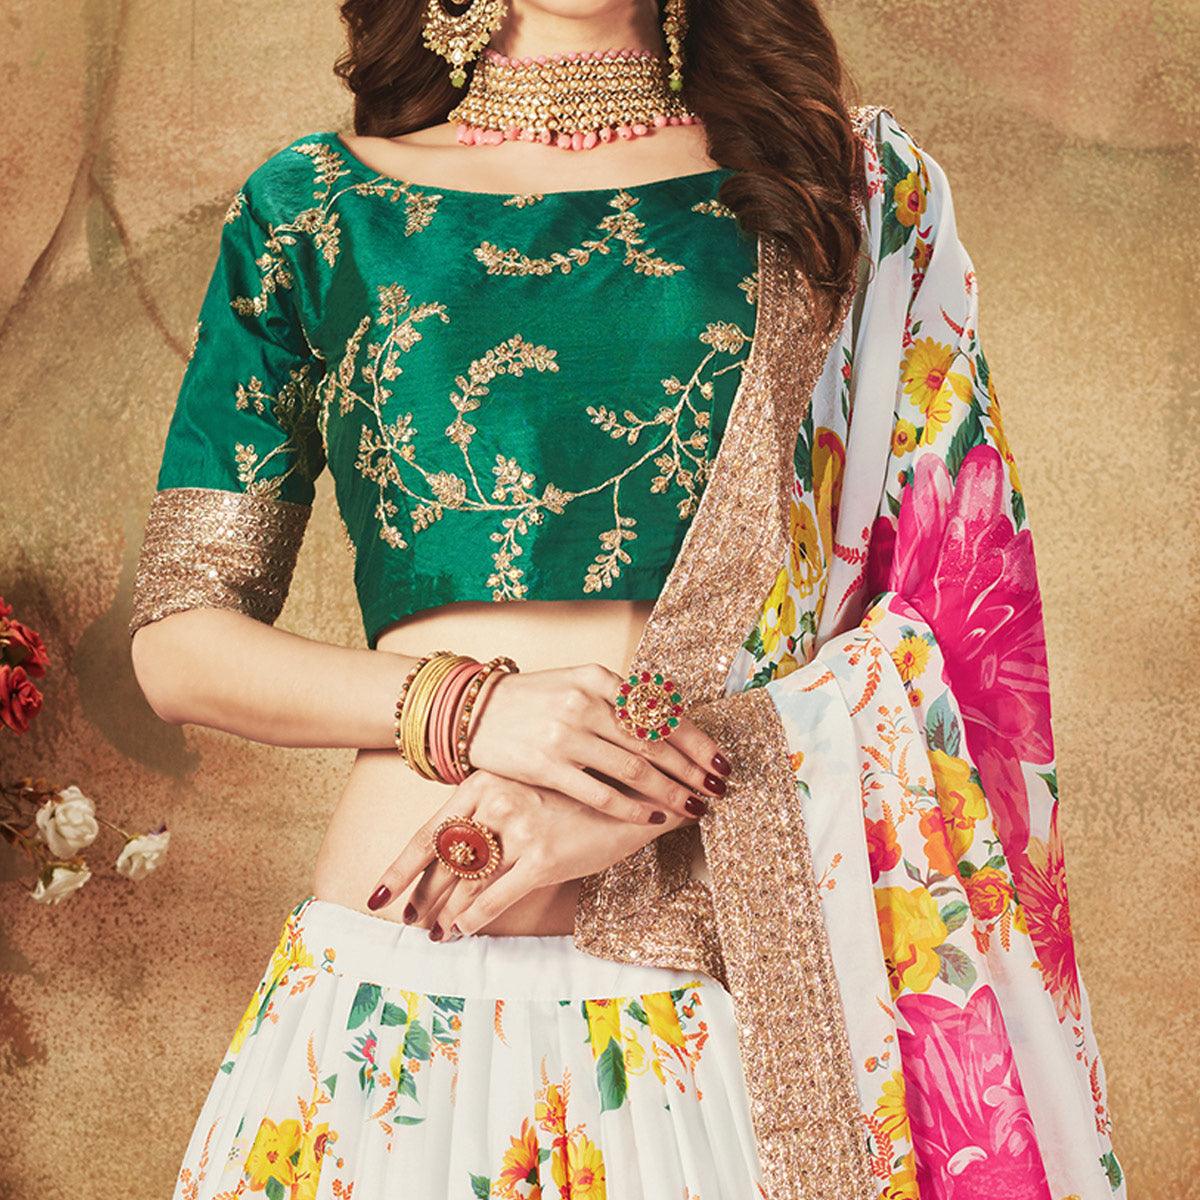 Off-White & Green Partywear Floral Print With Sequins Embroidery Organza Lehenga Choli - Peachmode